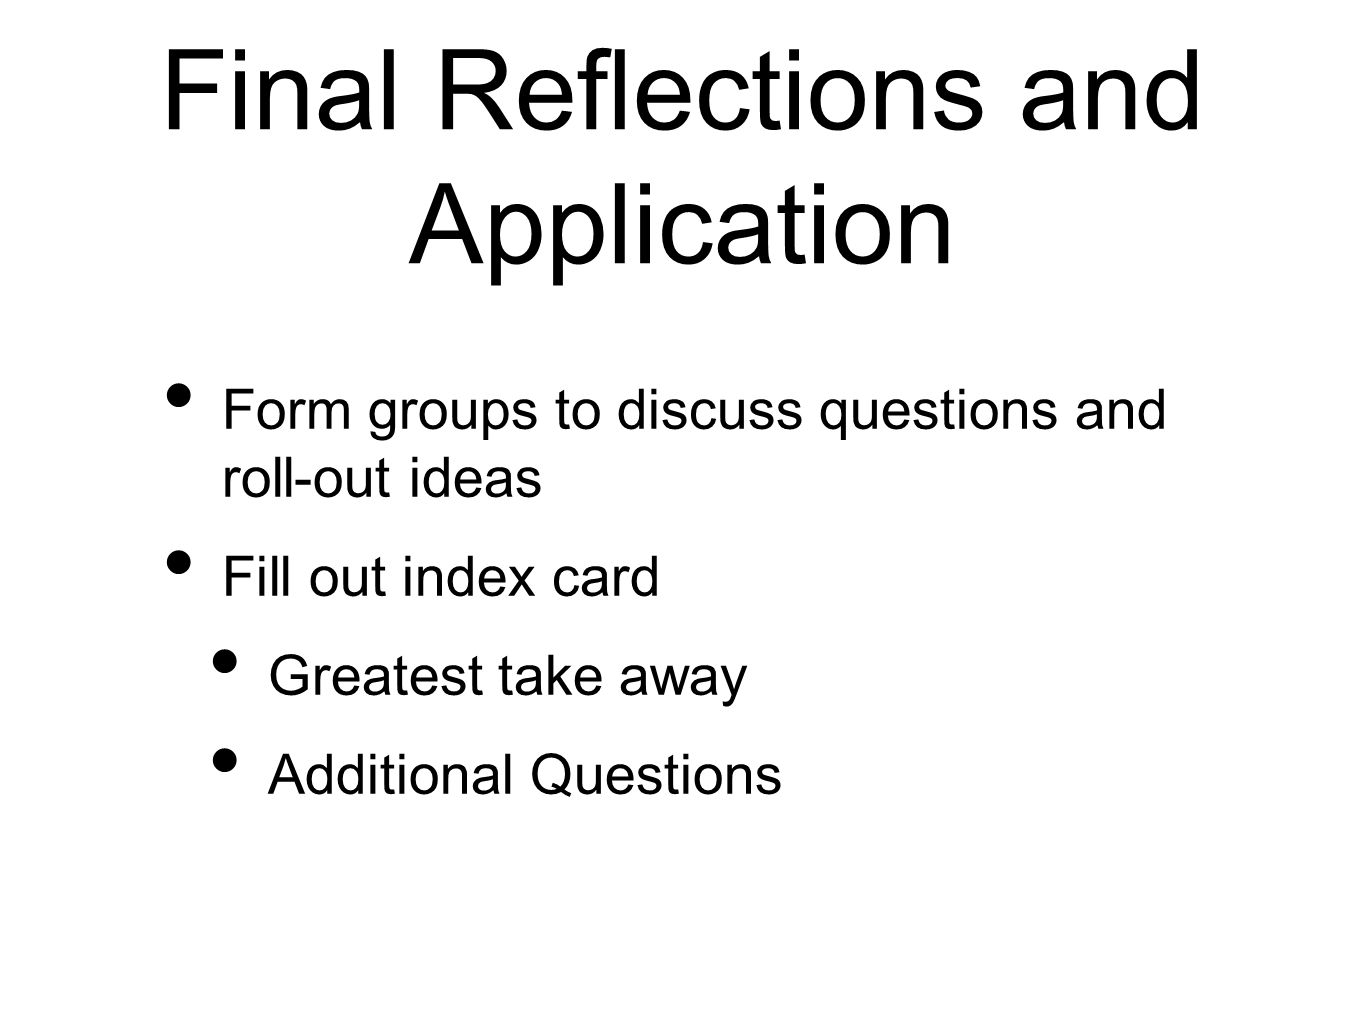 Final Reflections and Application